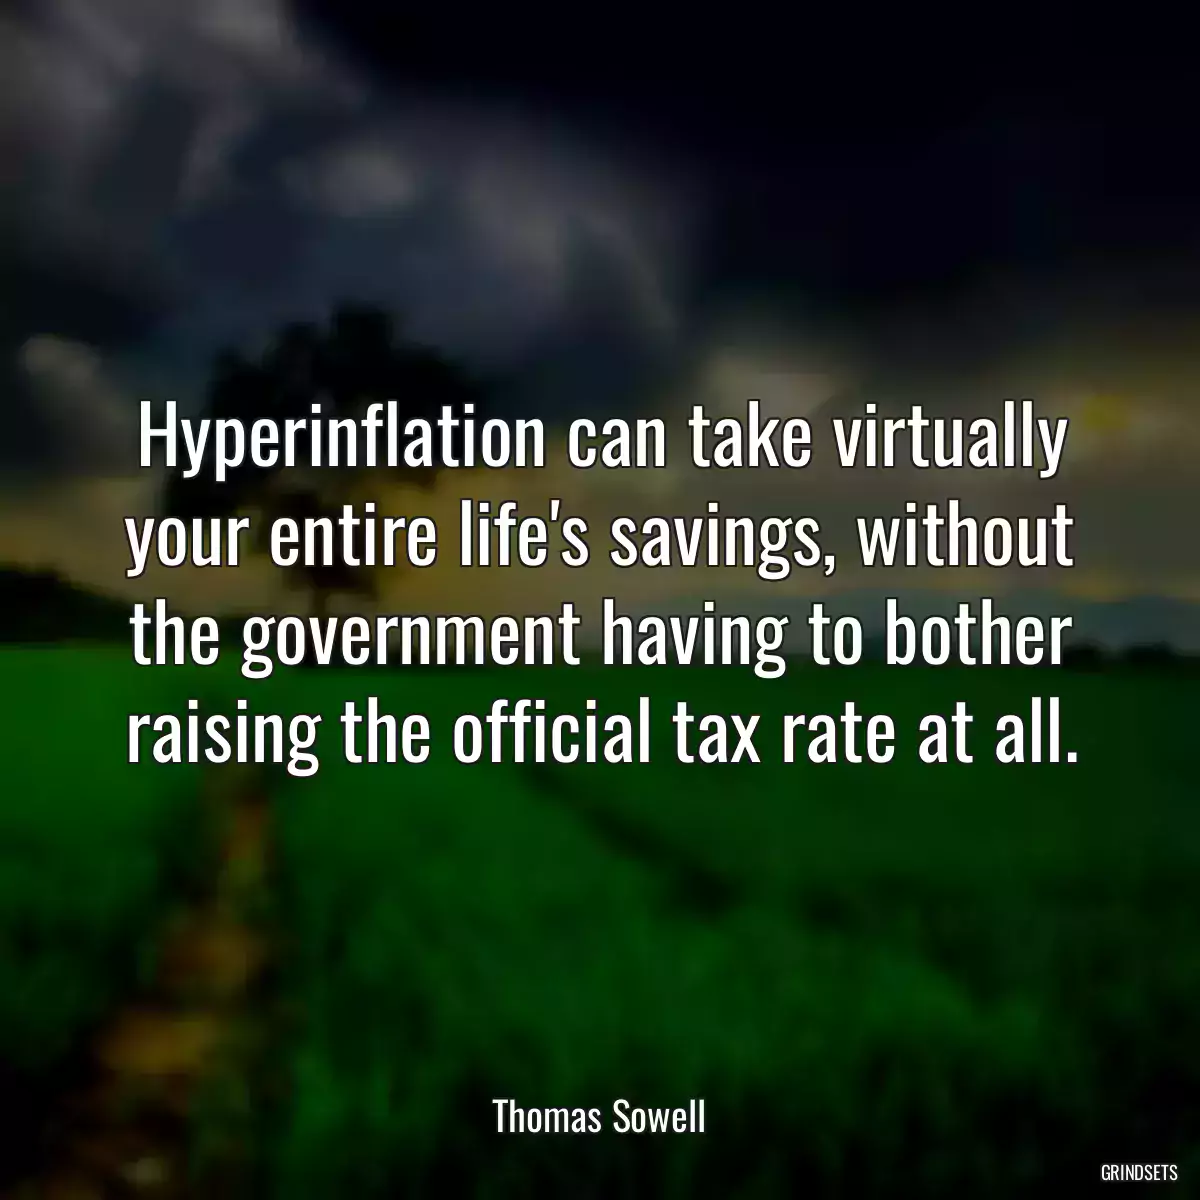 Hyperinflation can take virtually your entire life\'s savings, without the government having to bother raising the official tax rate at all.